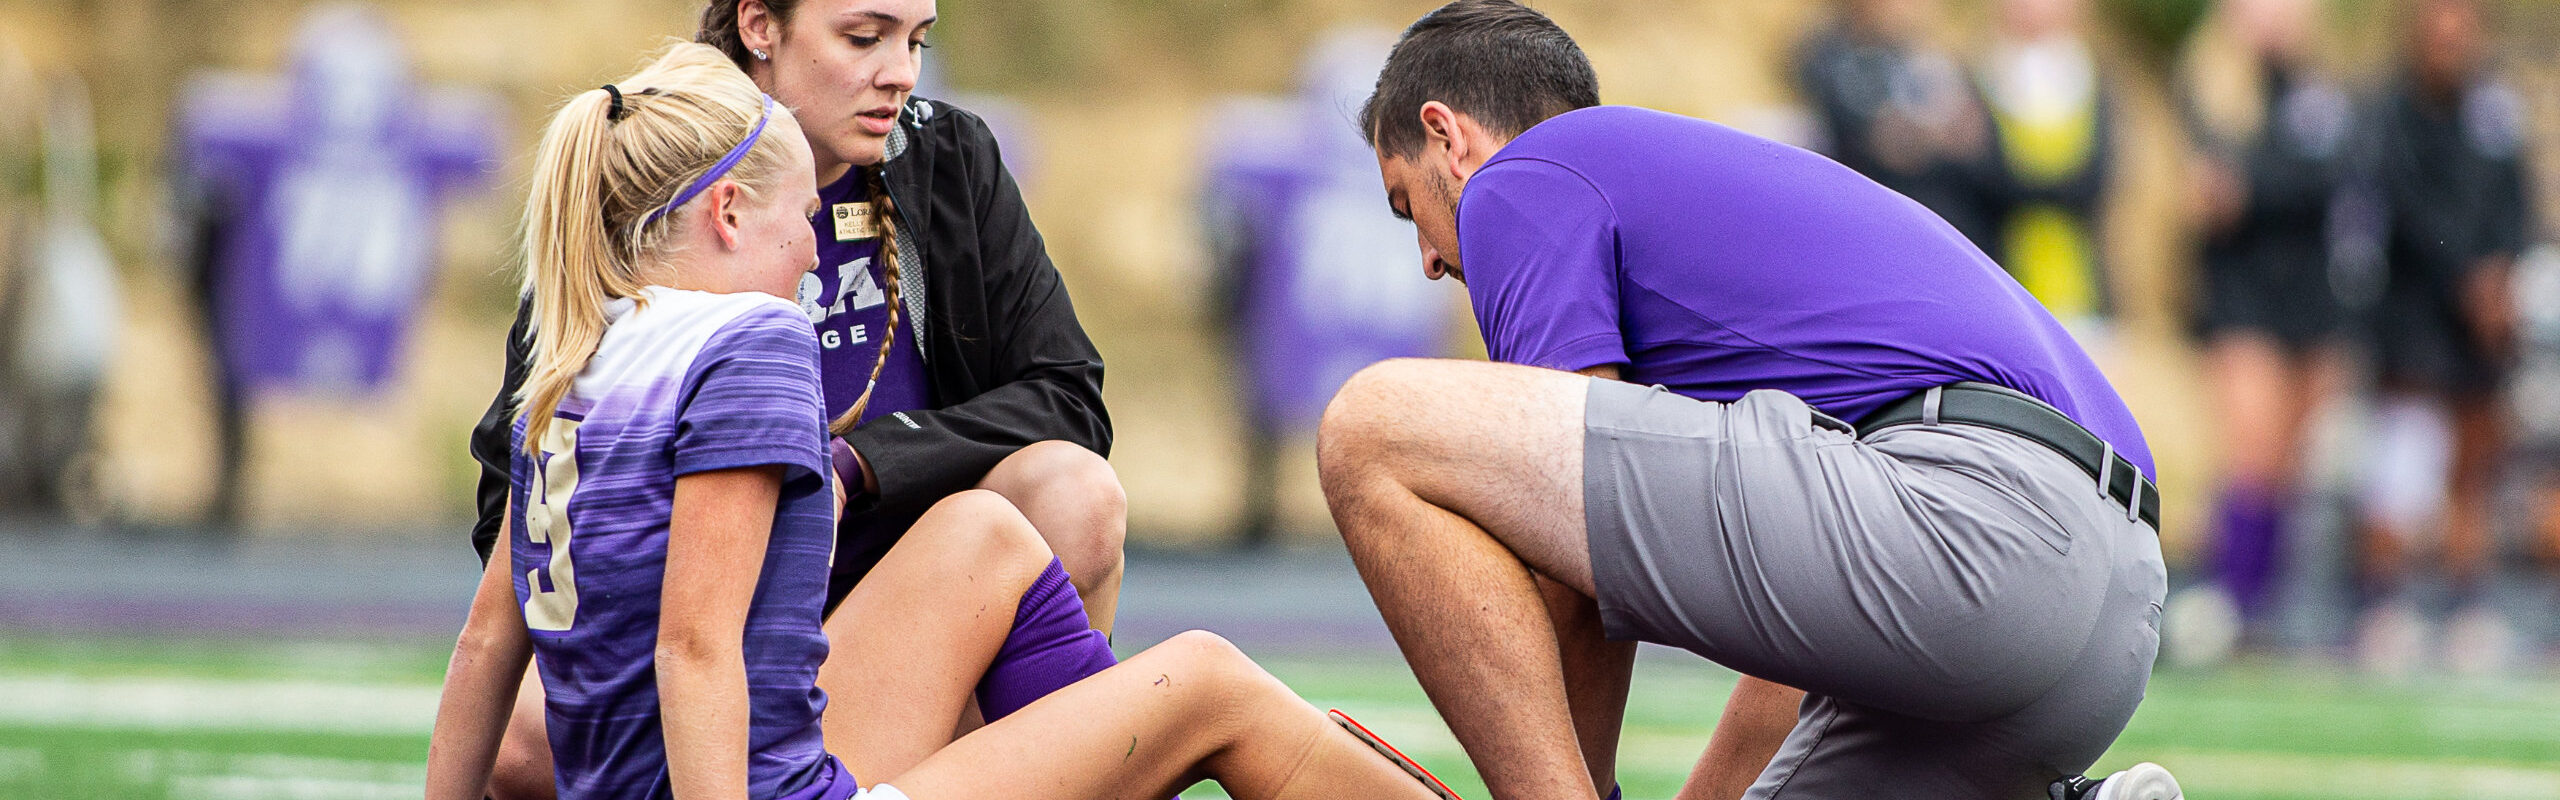 Duhawk Women’s Soccer player receiving assistance on her hurt ankle from Loras Athletic Training students